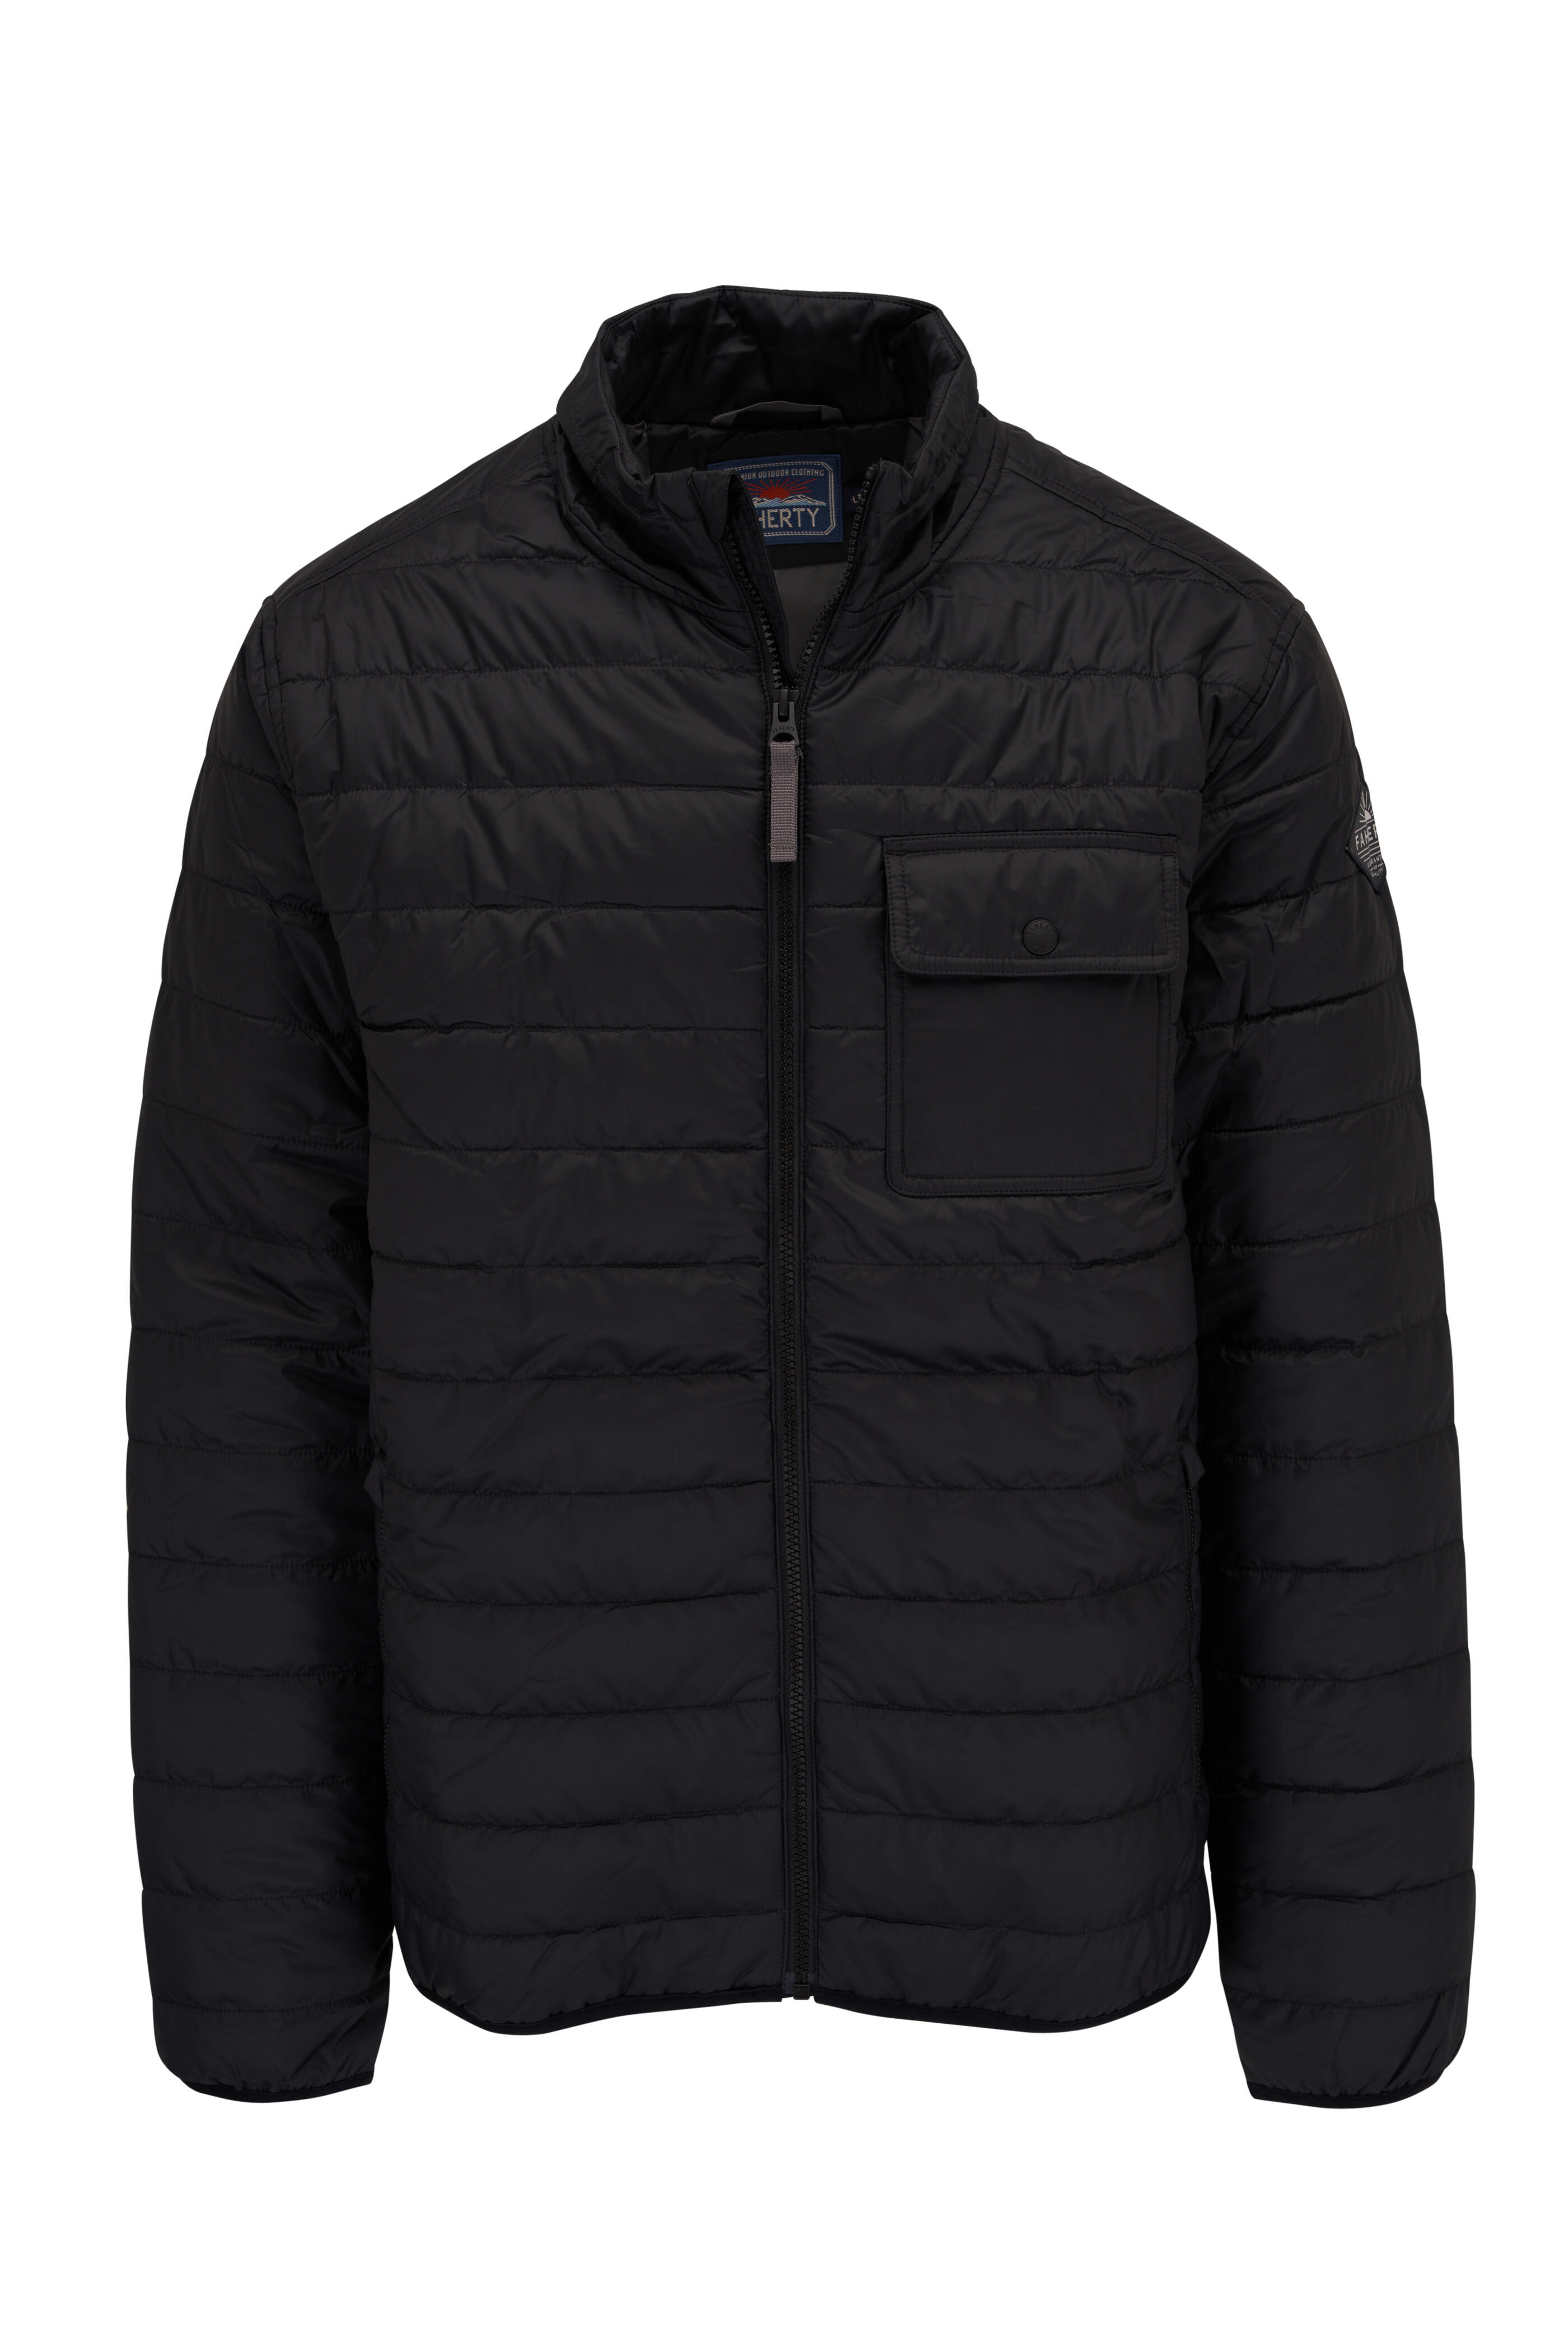 atmos apparel Collection QUILTING JACKET-